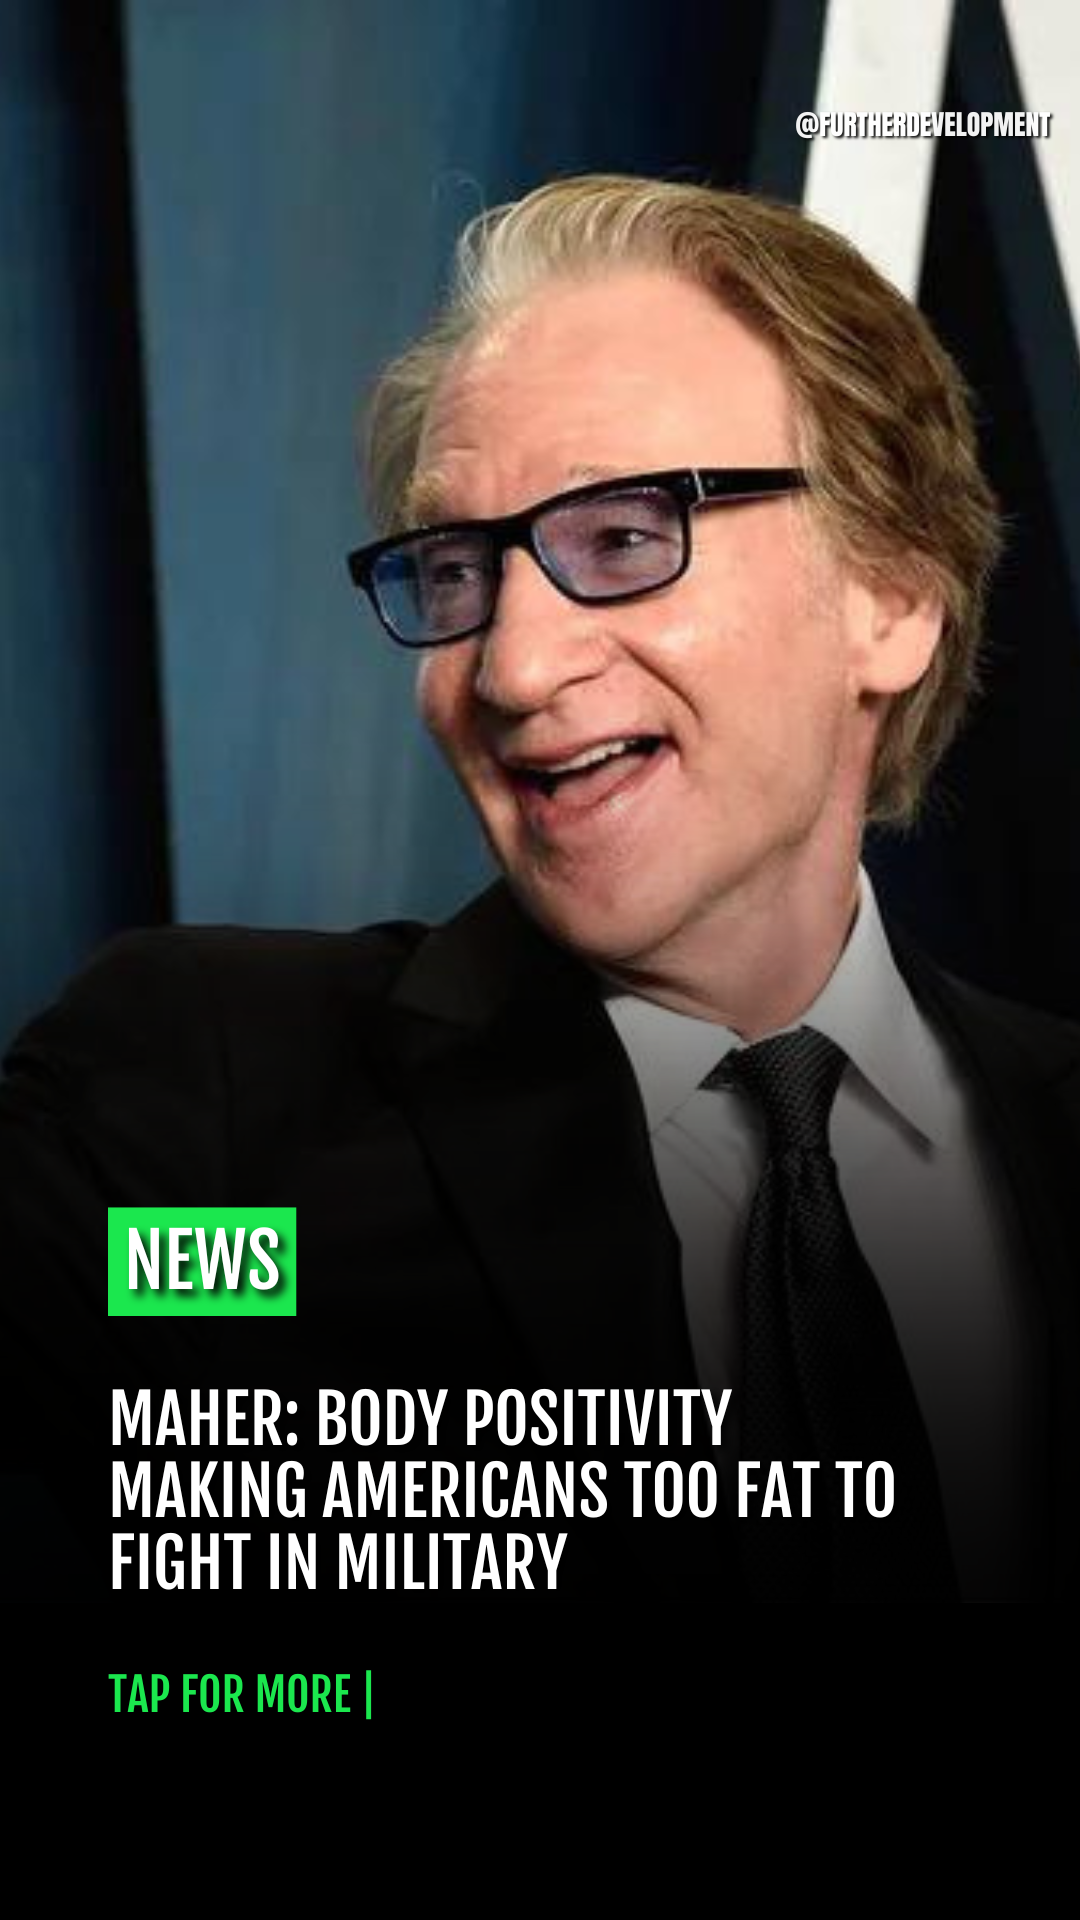 MAHER: BODY POSITIVITY MAKING AMERICANS too FAT TO FIGHT IN MILITARY